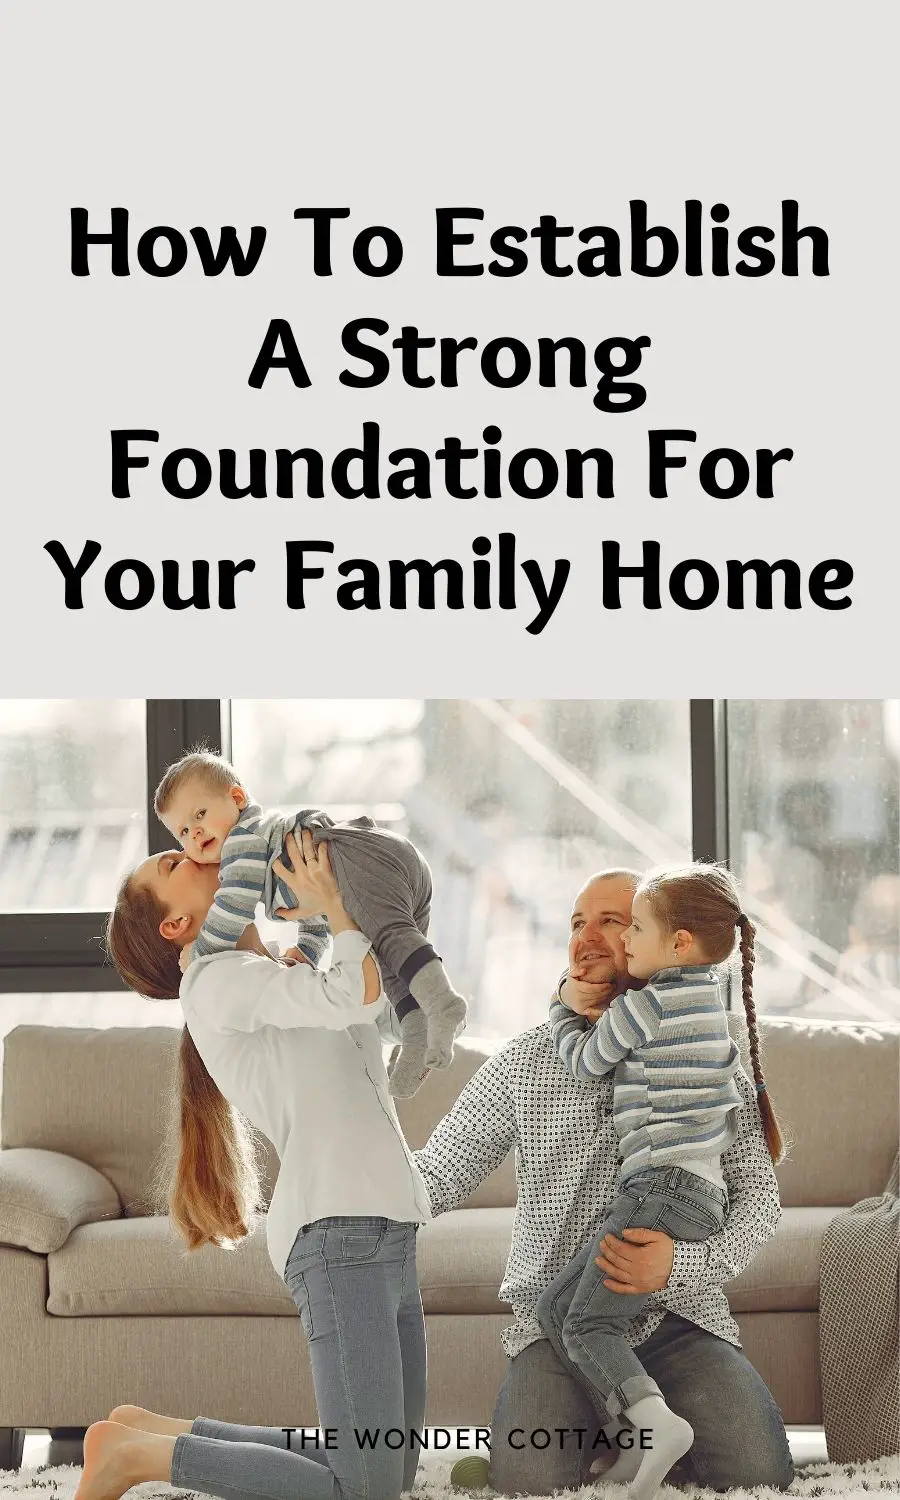 How To Establish A Strong Foundation For Your Family Home